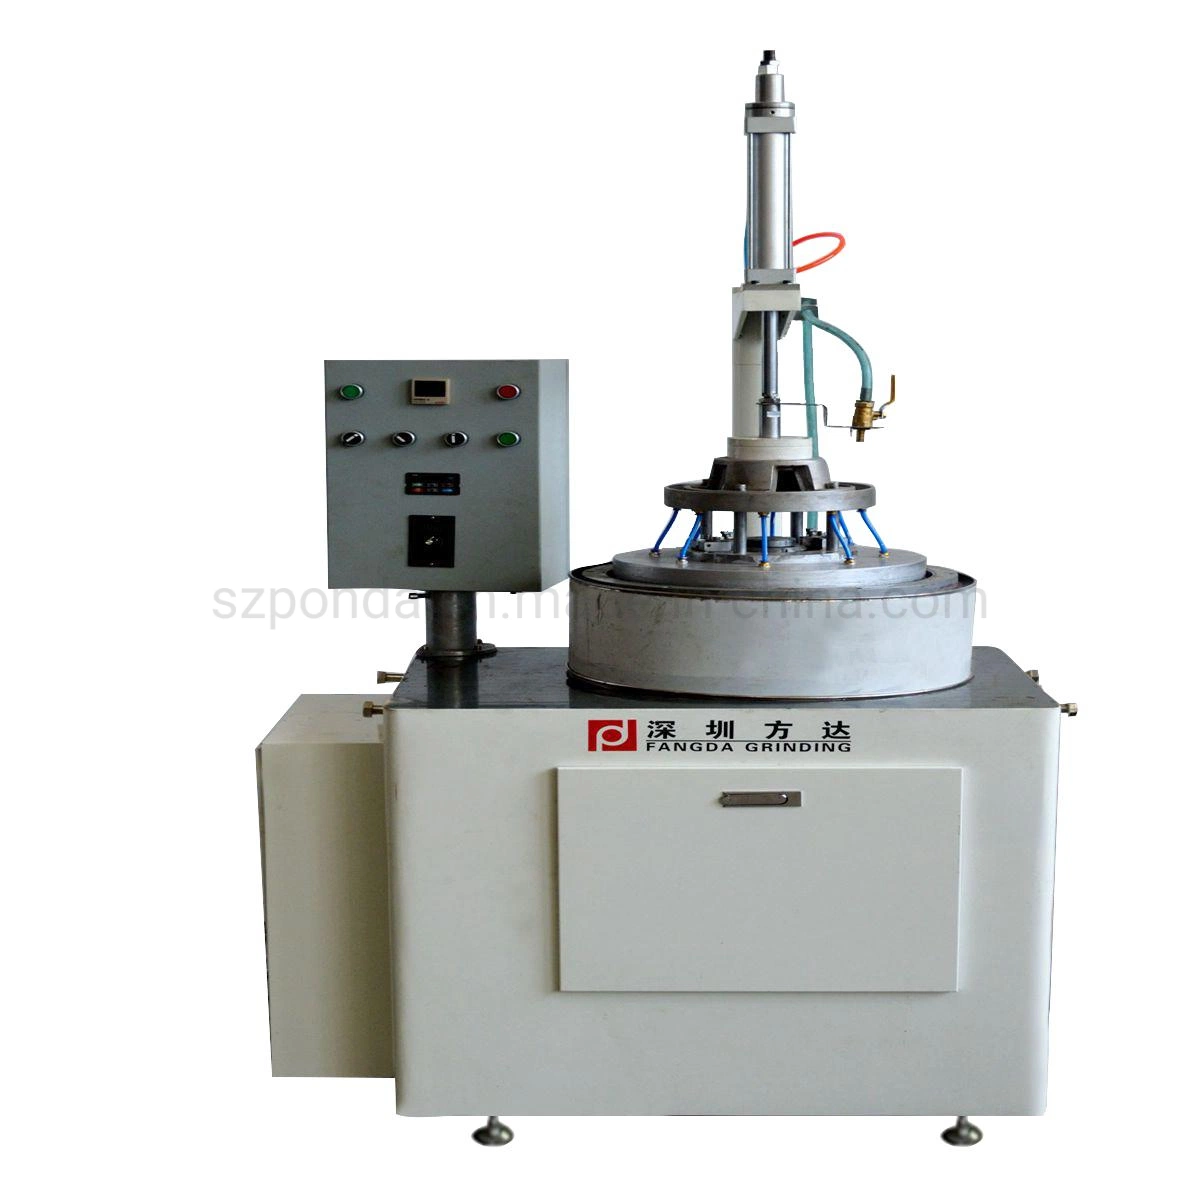 Alloy Steel Stainless Steel Double-Sided Grinding and Polishing CNC Machine Tools